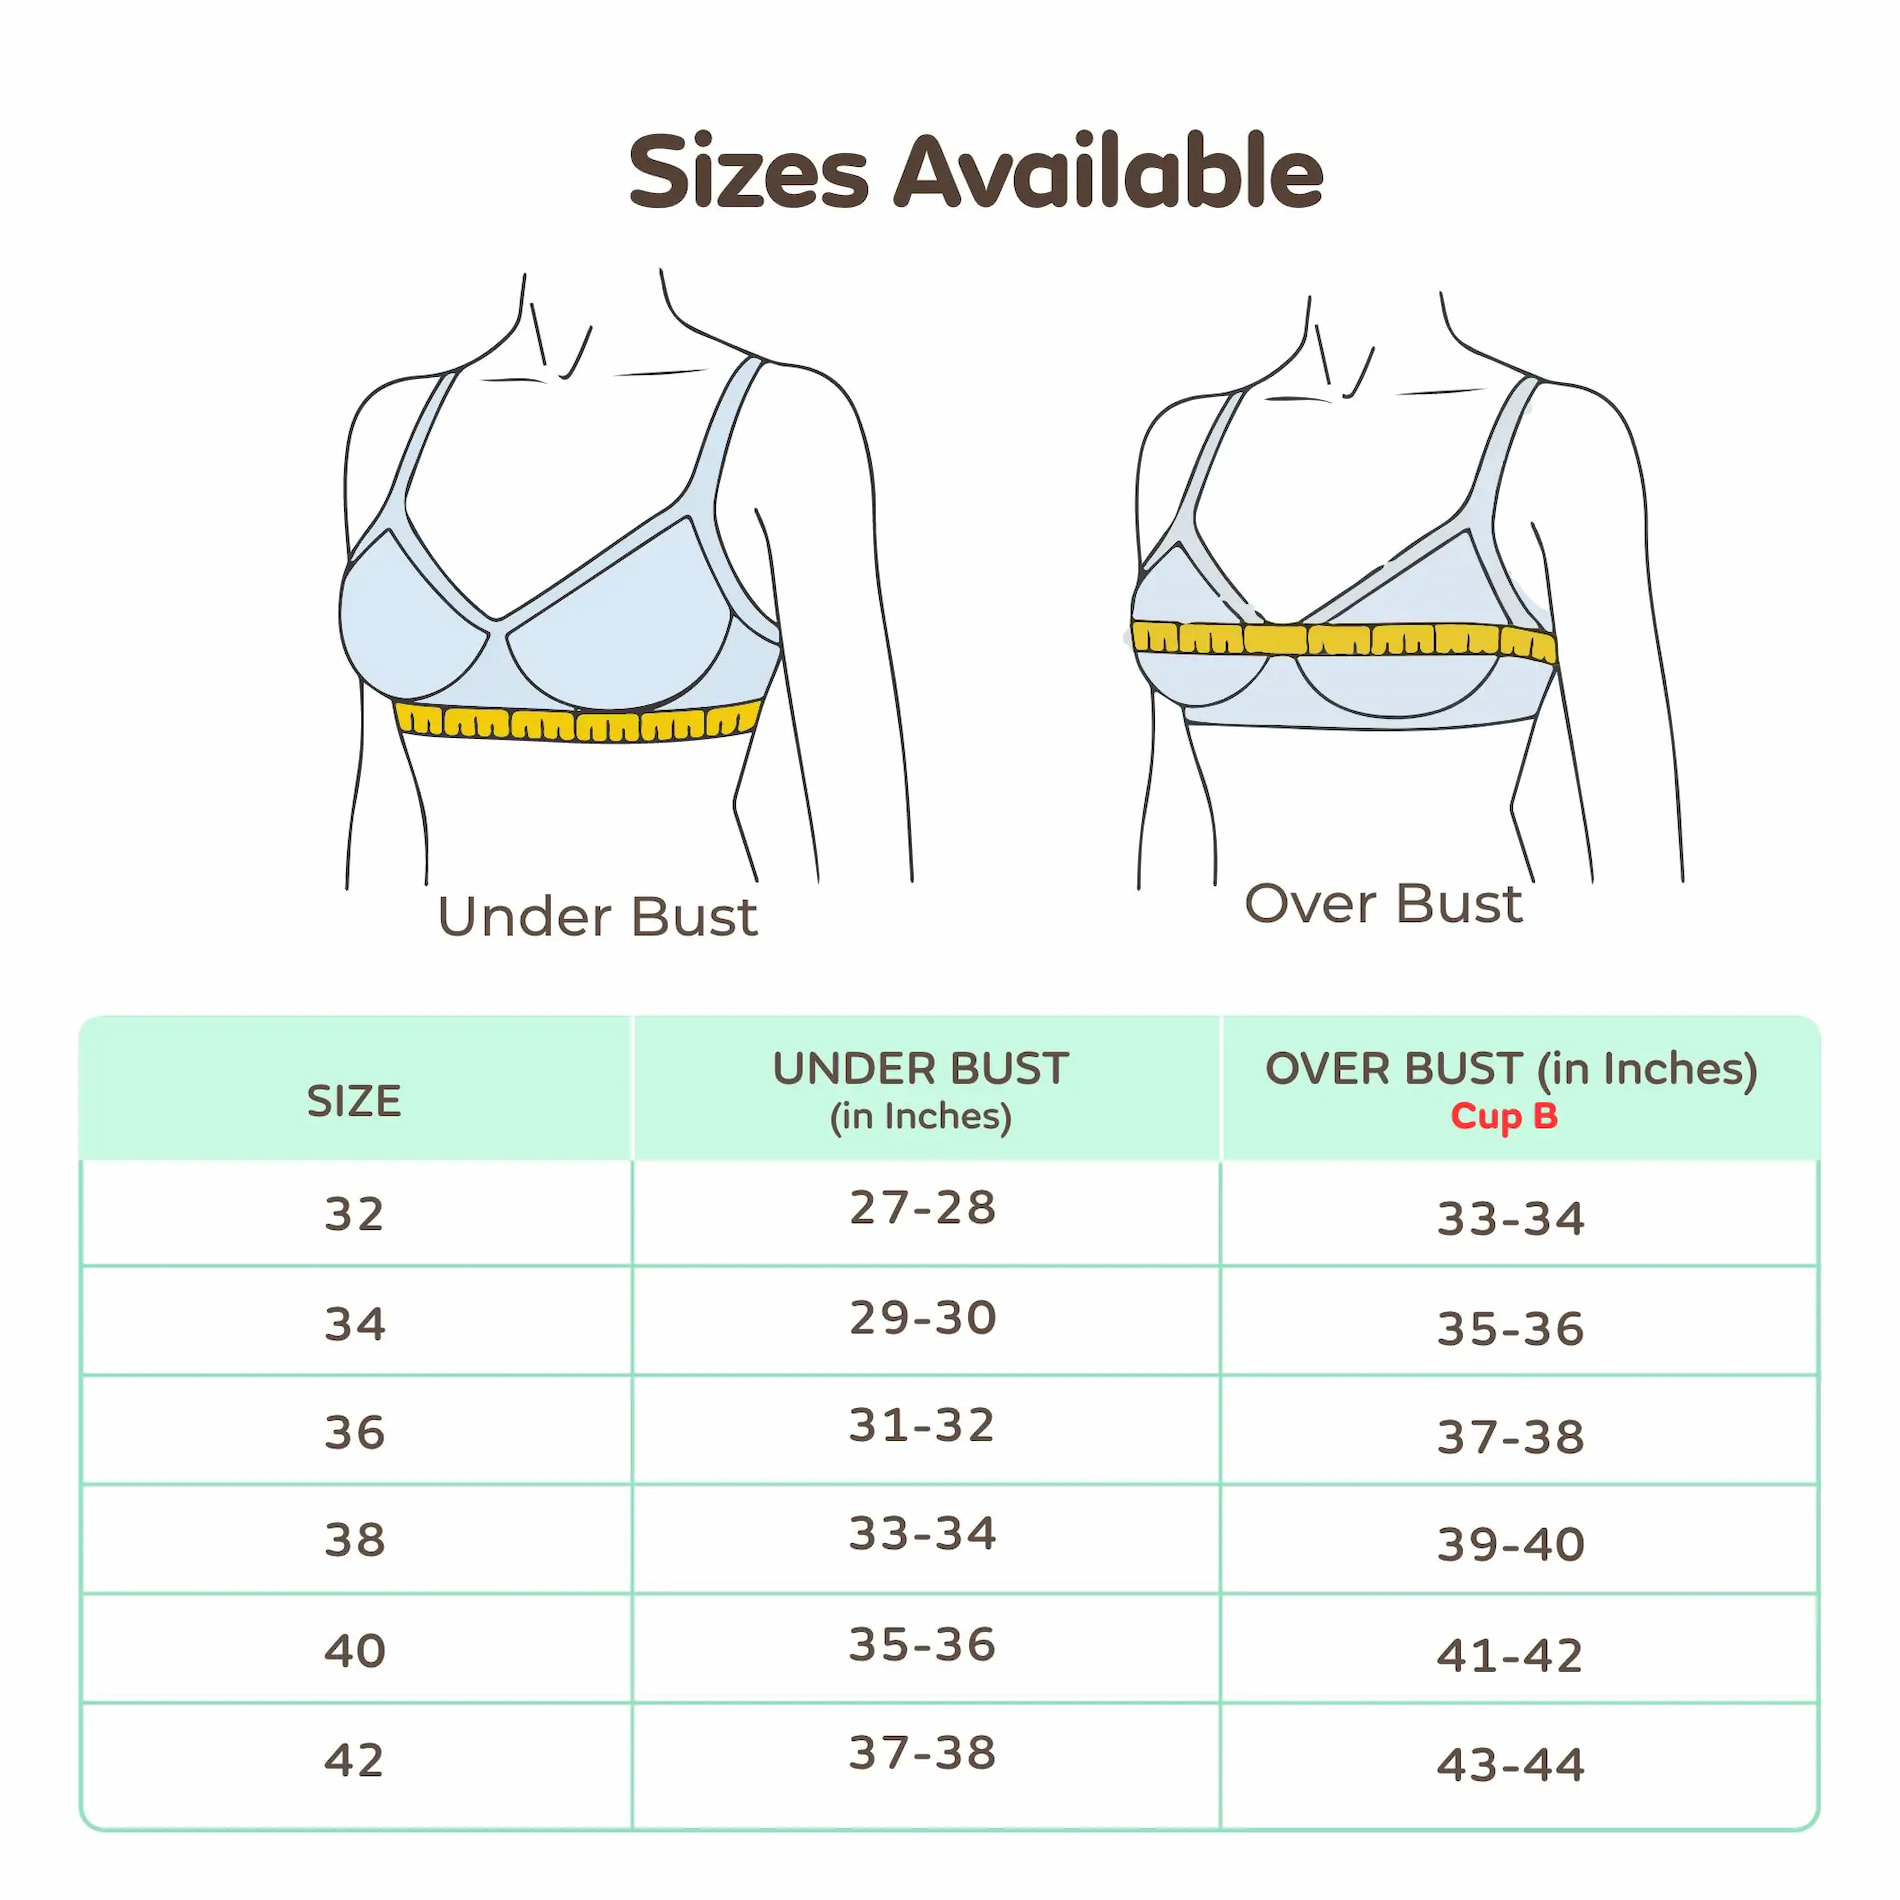 Mylo Maternity/Nursing Moulded Spacer Cup Bra Pack of 2 with free bra extender -(Navy, Skin) 32 B   